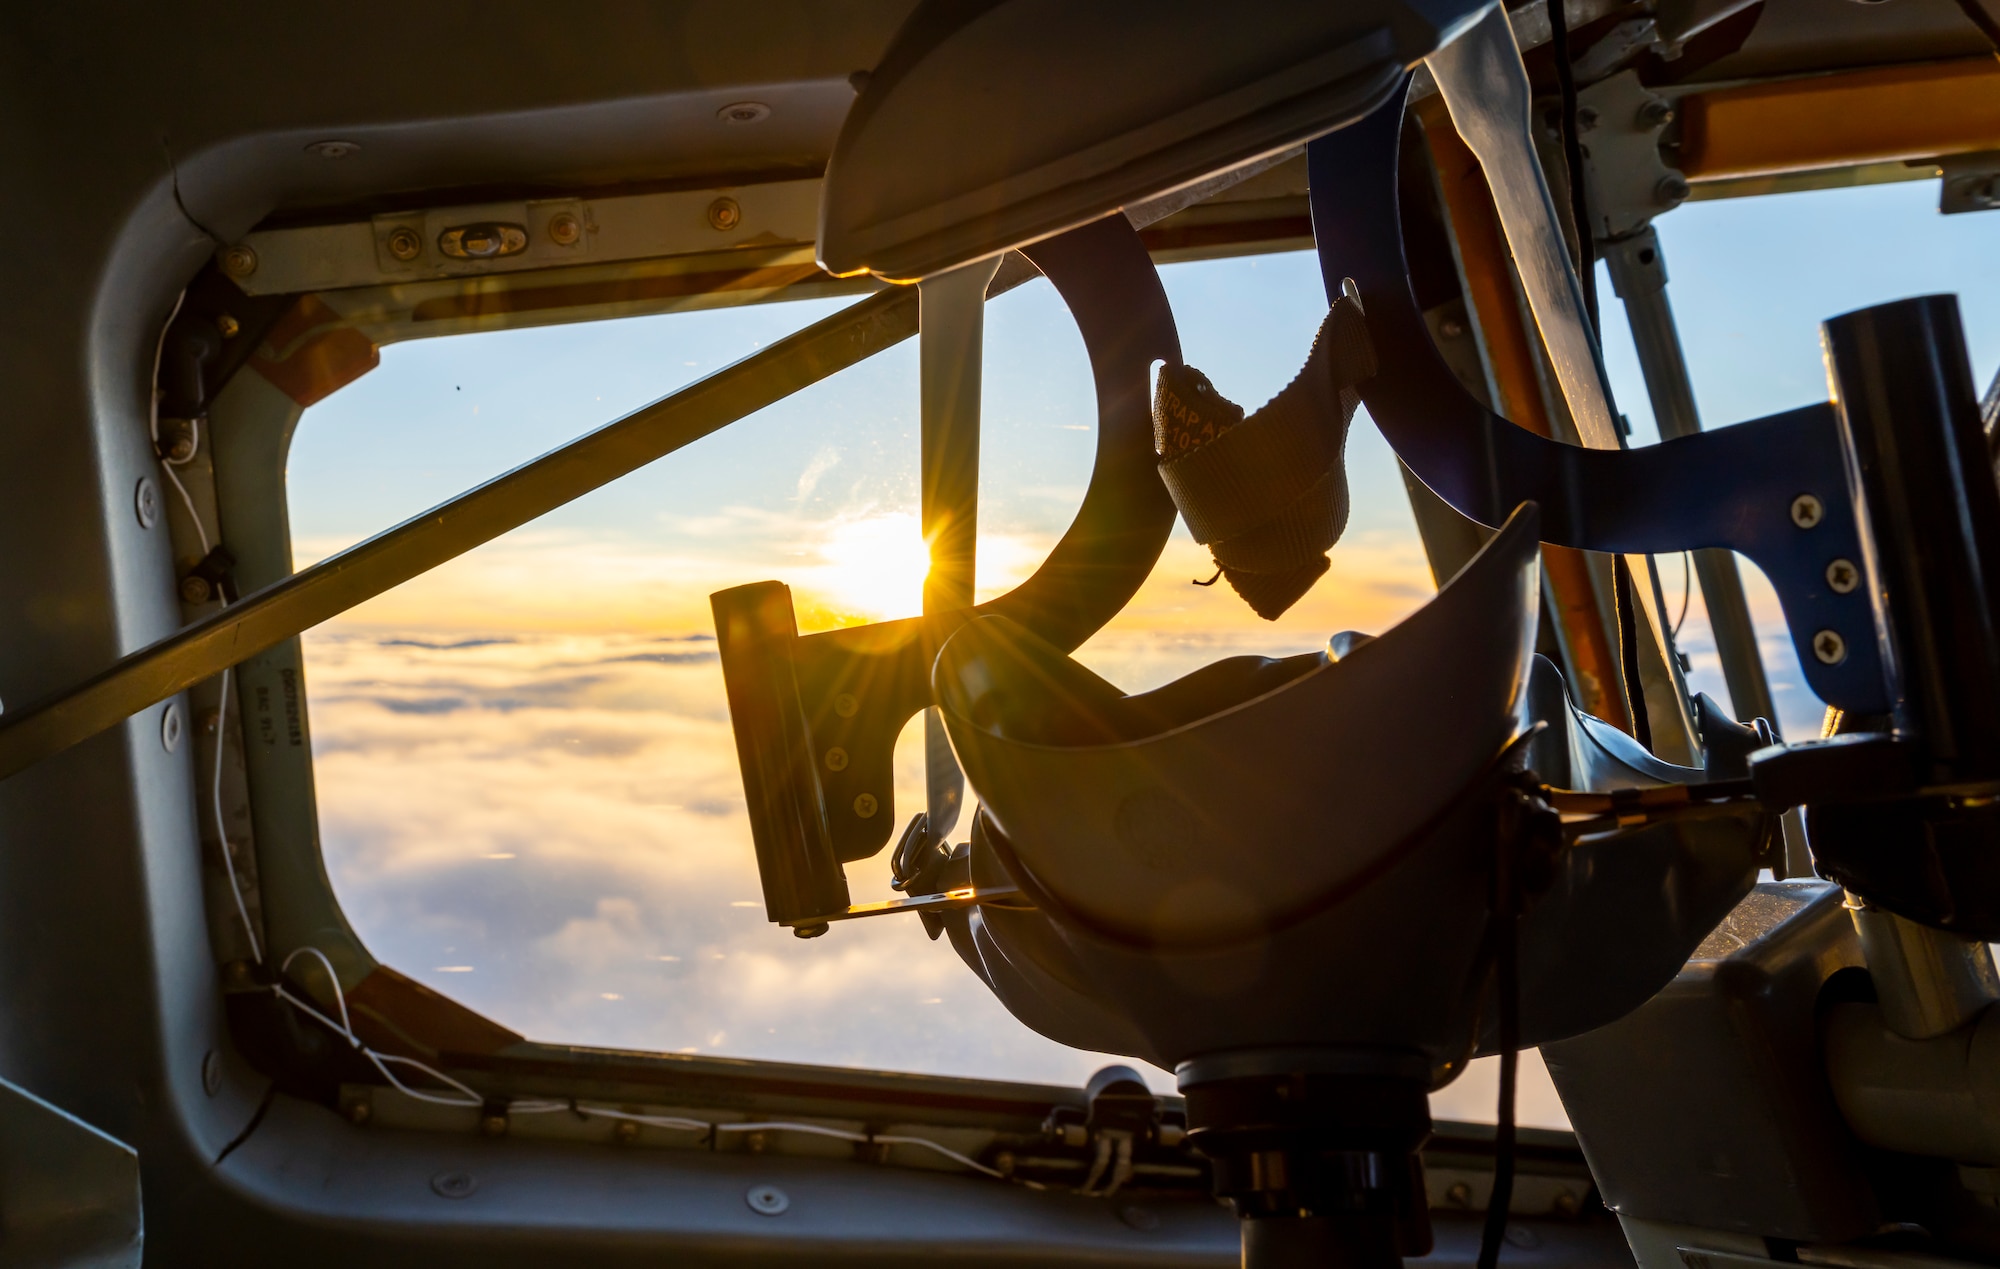 The sun sets over the North Sea horizon through the window of a KC-135 Stratotanker aircraft assigned to the 100th Air Refueling Wing at Royal Air Force Mildenhall, England, during a refueling mission, July 21, 2022. The 100th Air Refueling Wing uses the KC-135 to continuously provide the critical air refueling bridge that allows the Expeditionary Air Force to deploy around the globe in a moments notice.